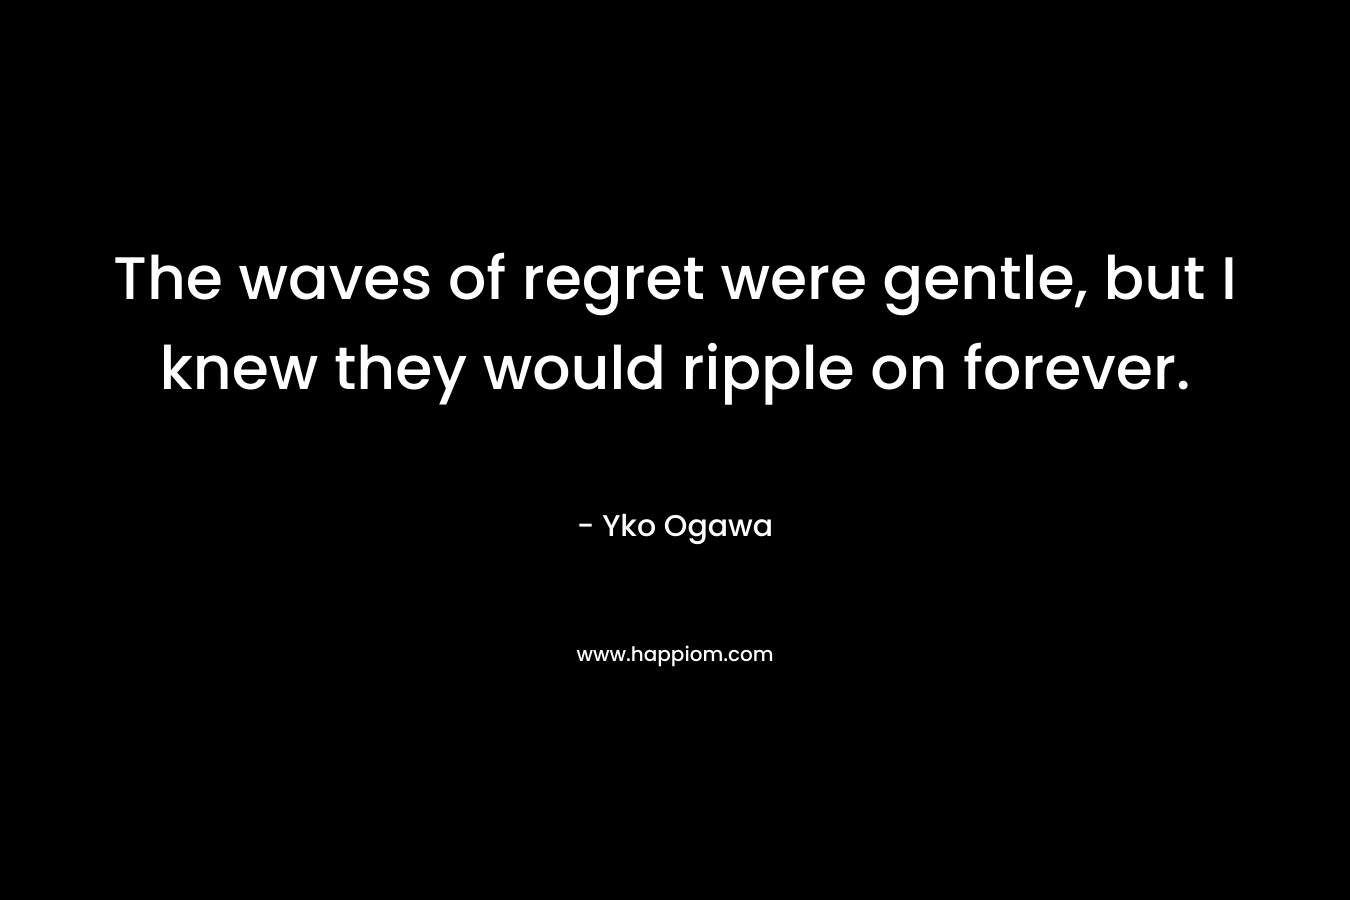 The waves of regret were gentle, but I knew they would ripple on forever. – Yko Ogawa